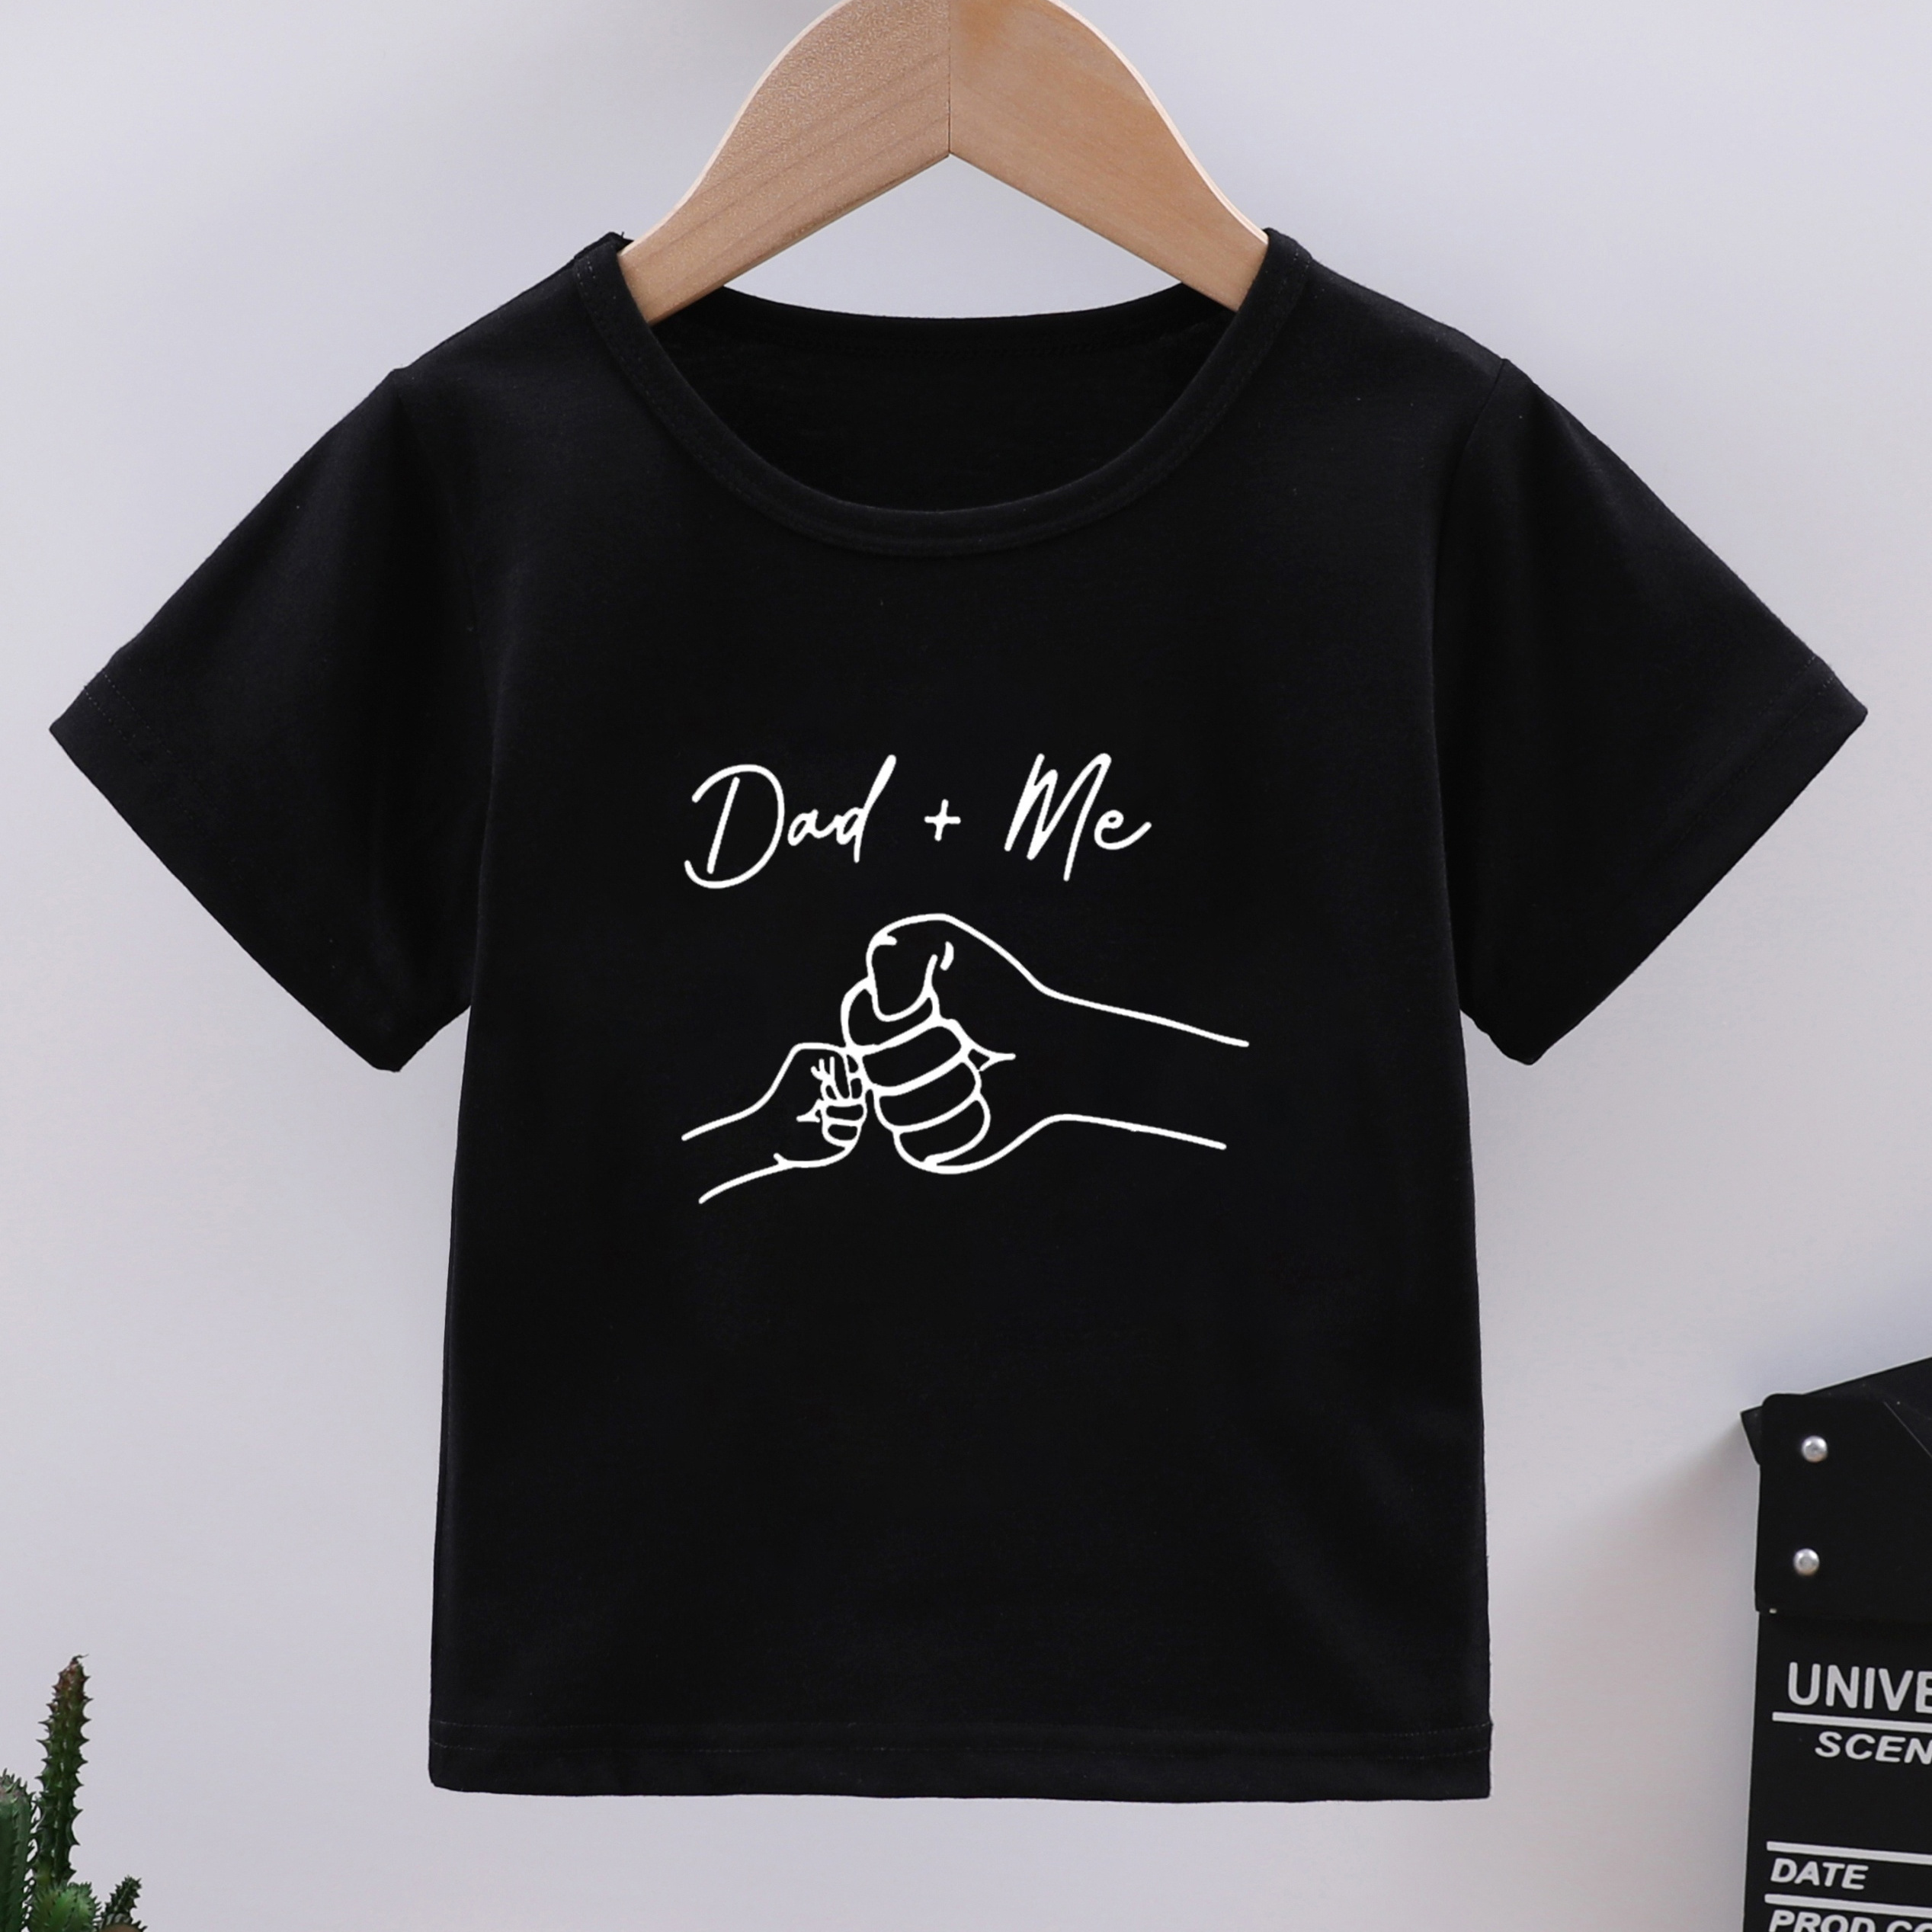 

Dad+me Fist Print Boys Creative T-shirt, Casual Lightweight Comfy Short Sleeve Crew Neck Tee Tops, Kids Clothings For Summer